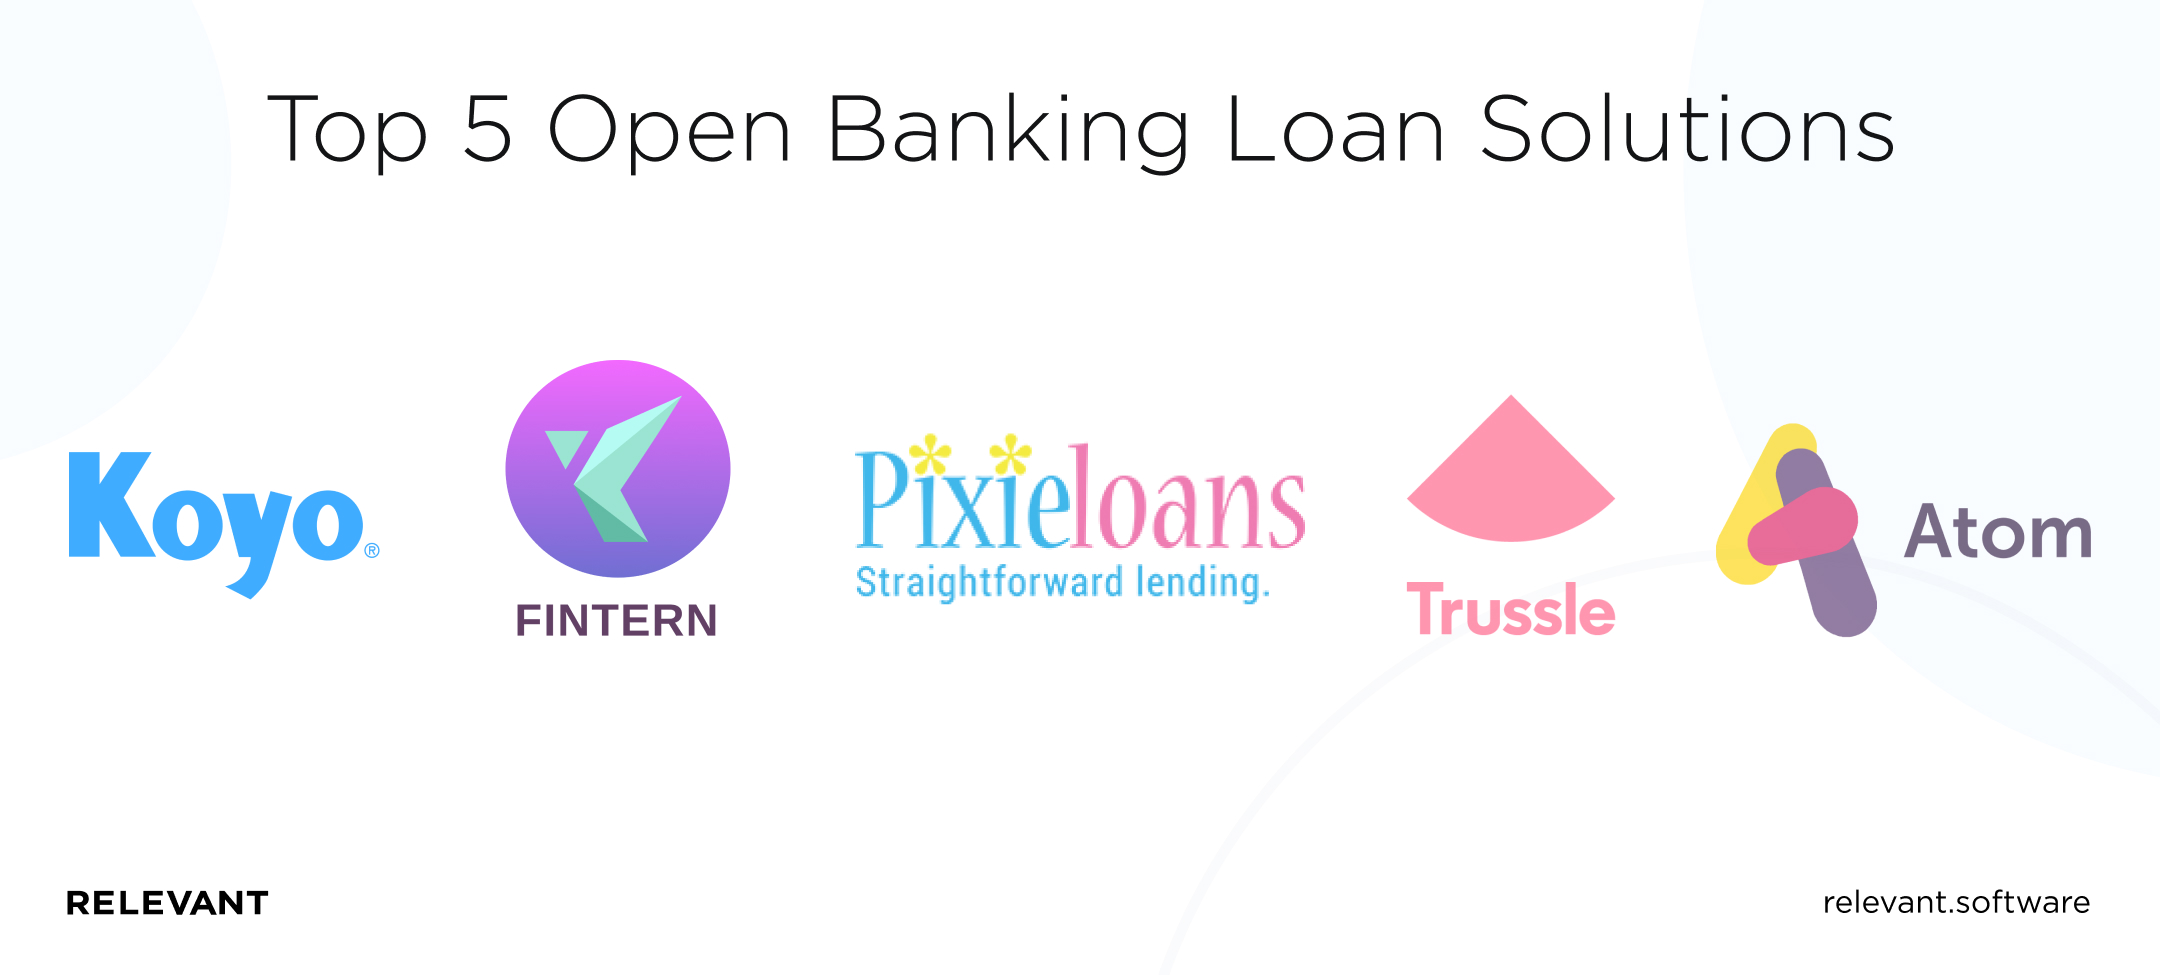 Main Advantages of Open Banking Loans